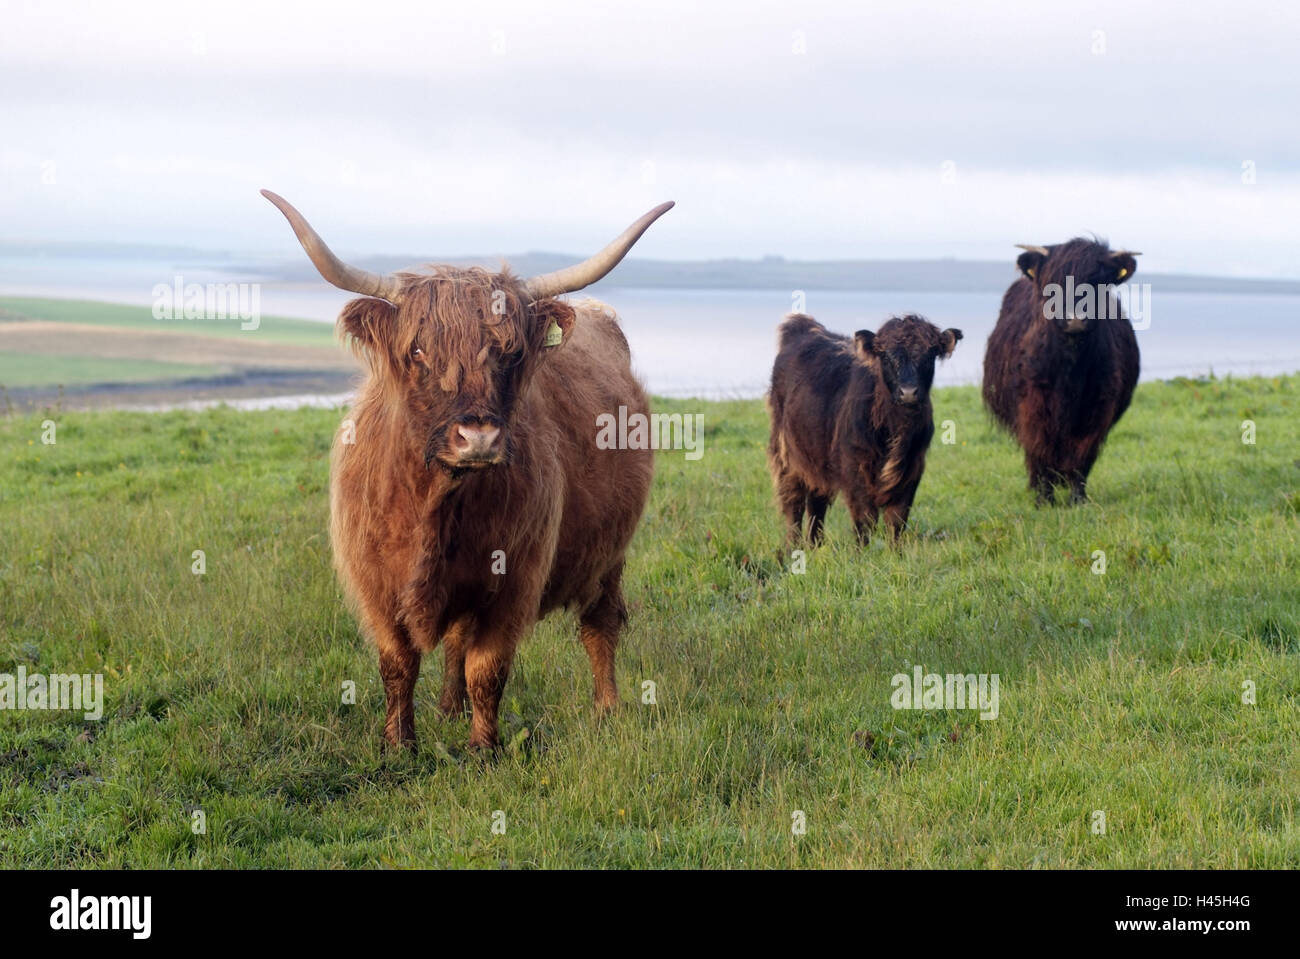 Great Britain, Scotland, Orkney Islands, island Mainland, pasture, cattle, Highland Cattle, Stock Photo